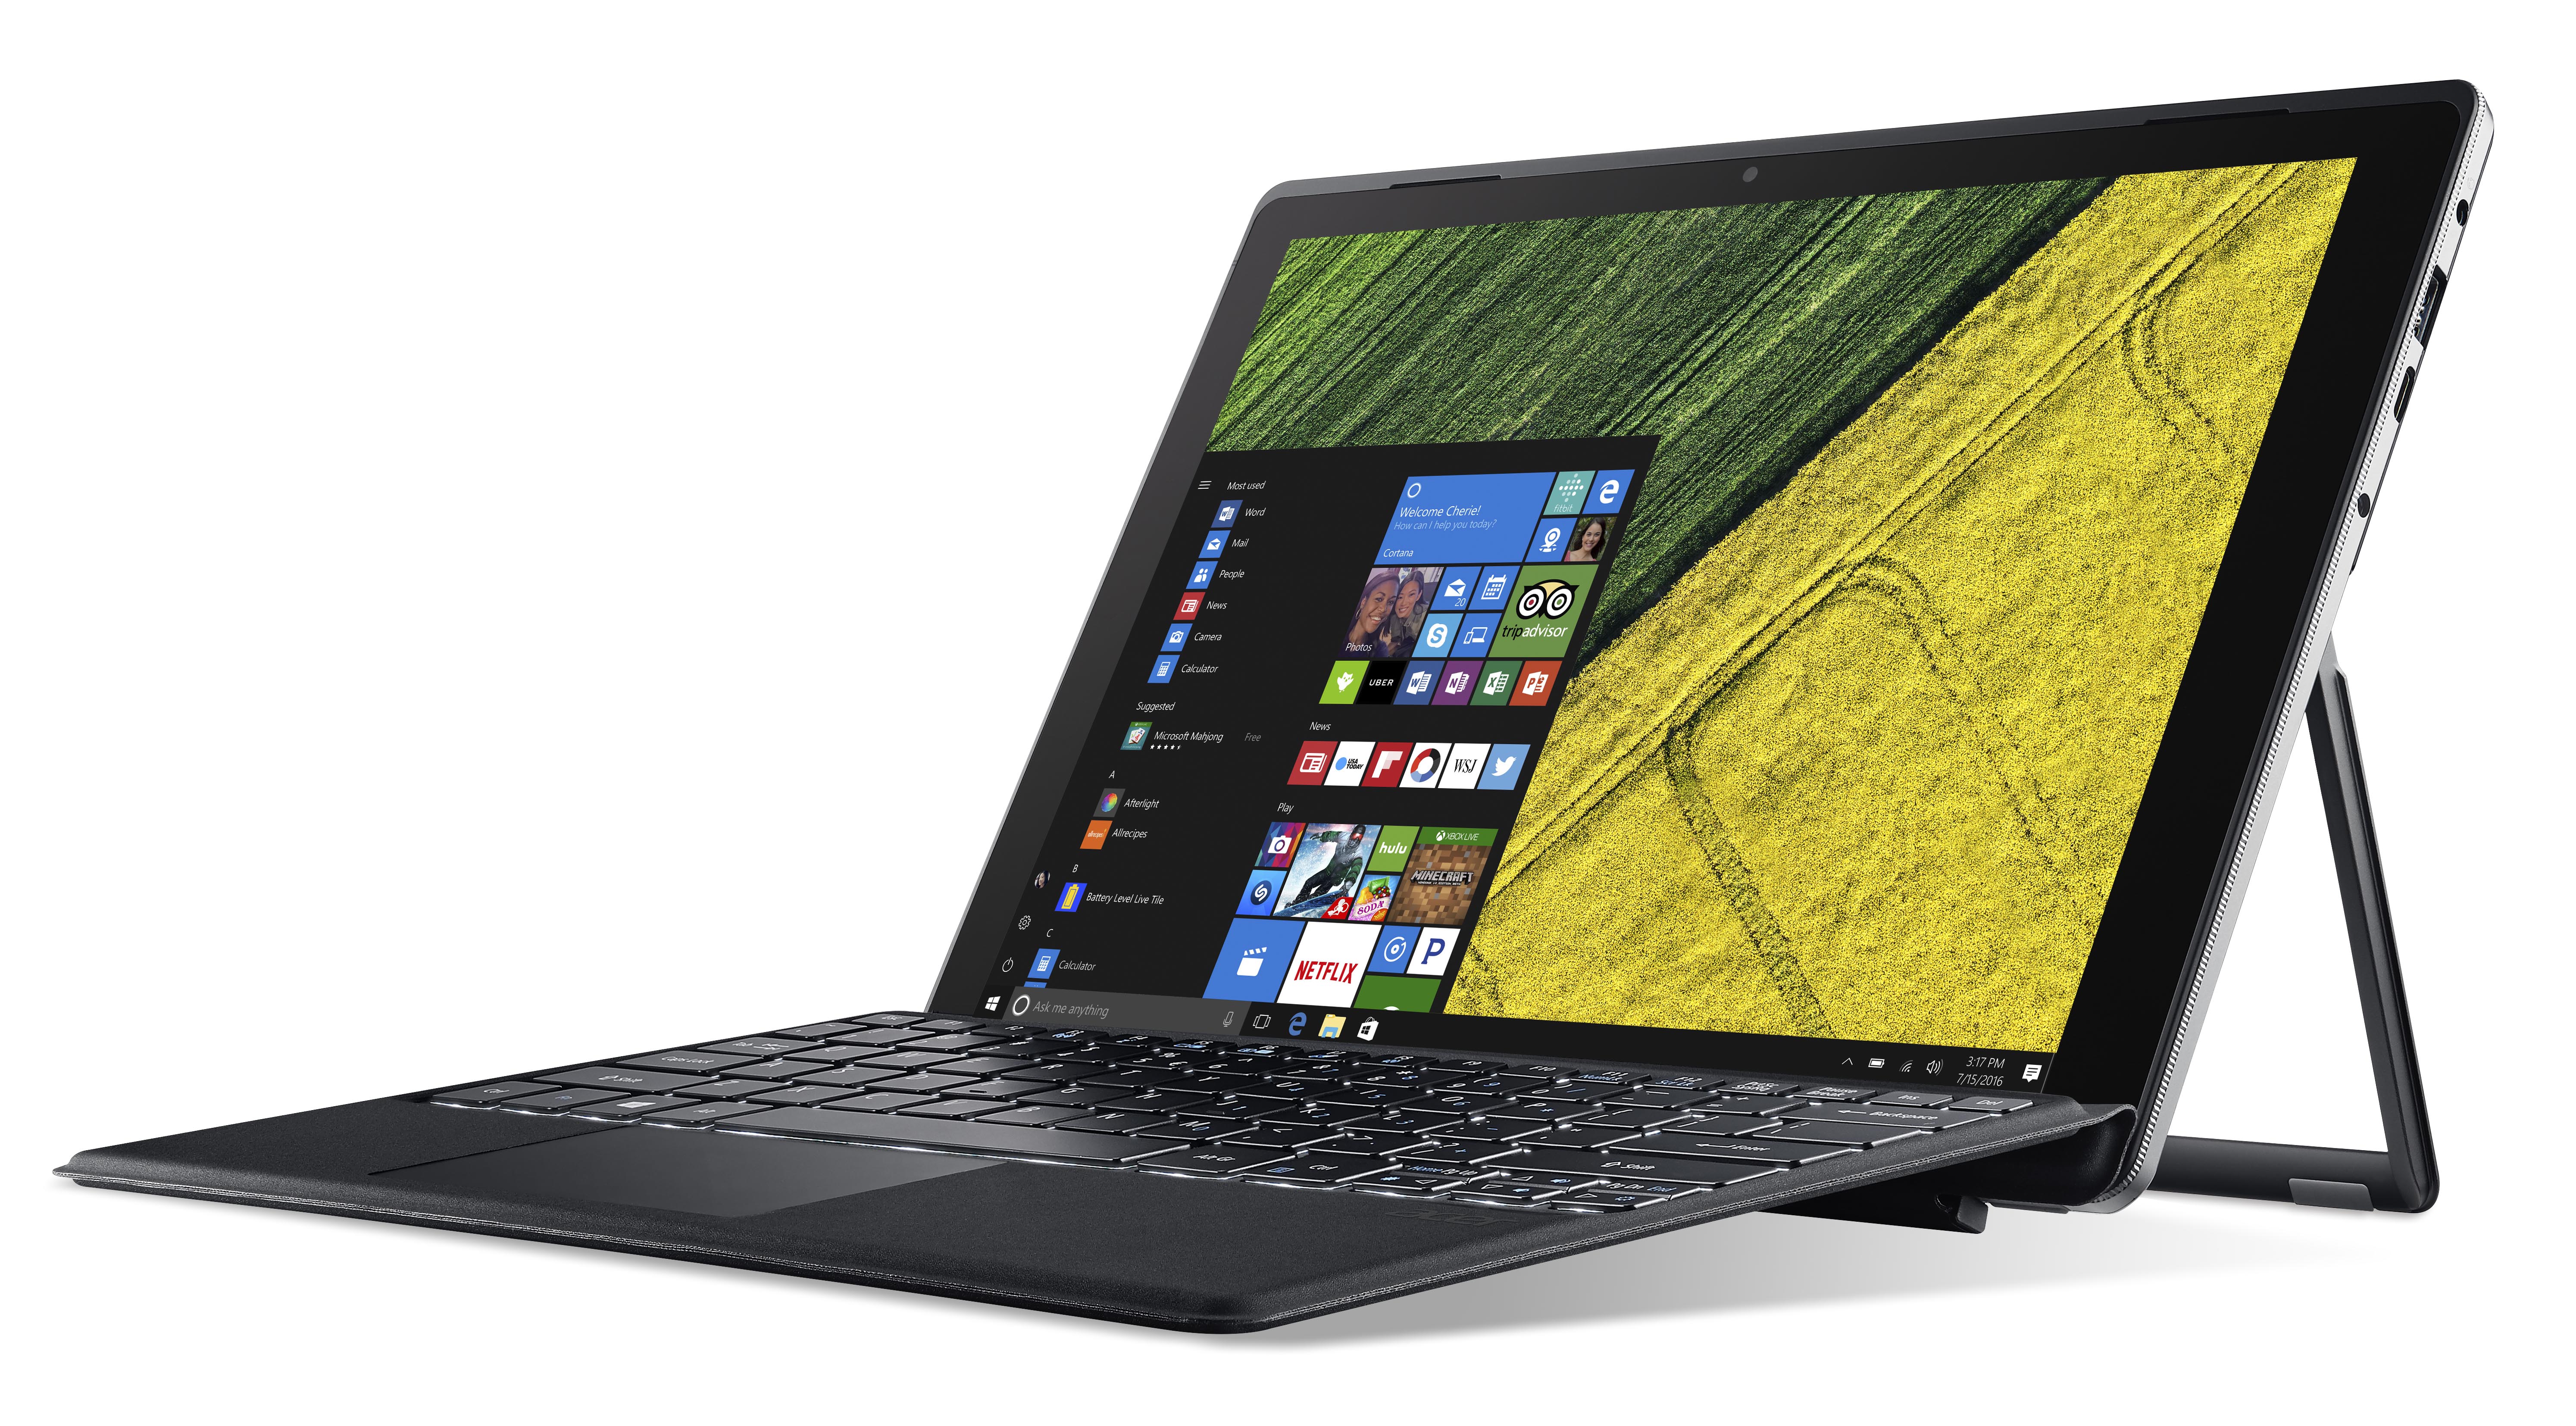 The Acer Switch 5 with Windows 10